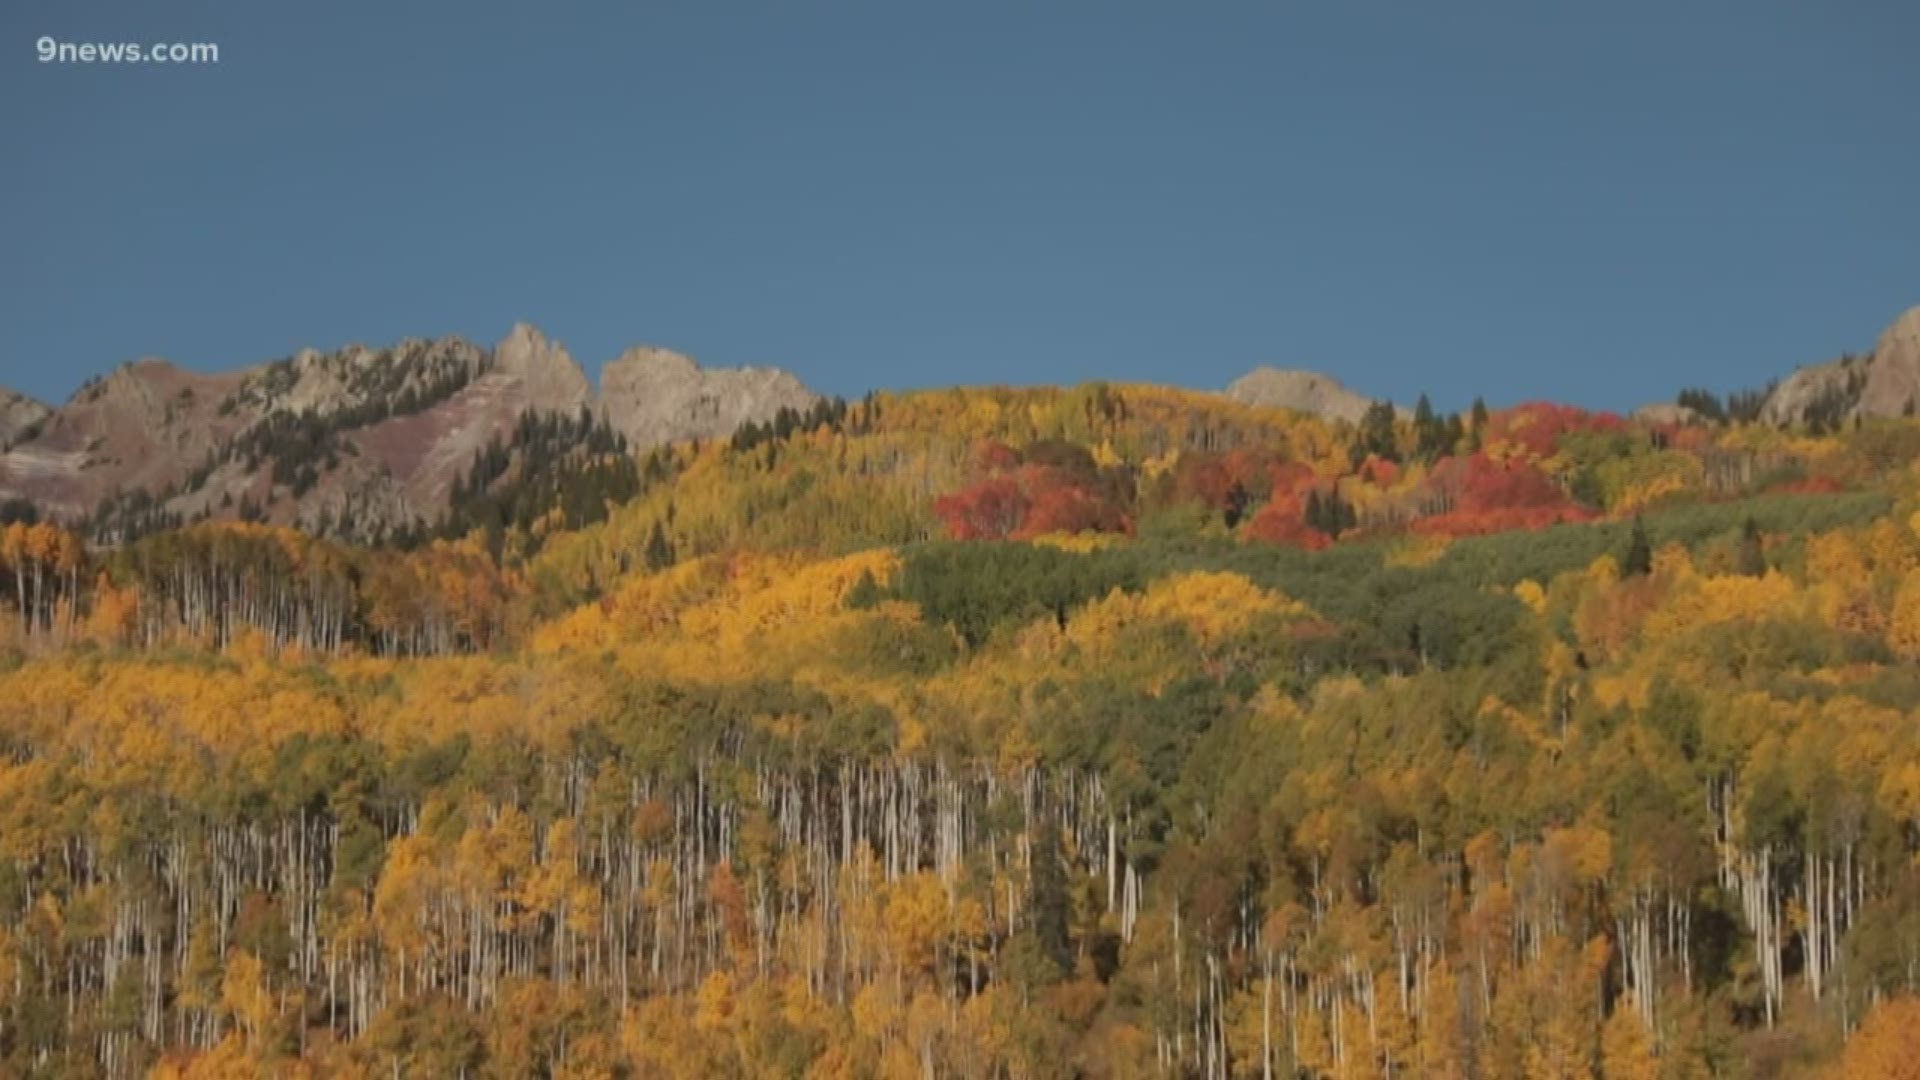 The beauty of the fall colors in Colorado's high country are put into words by Almont poet Brian Calvert.